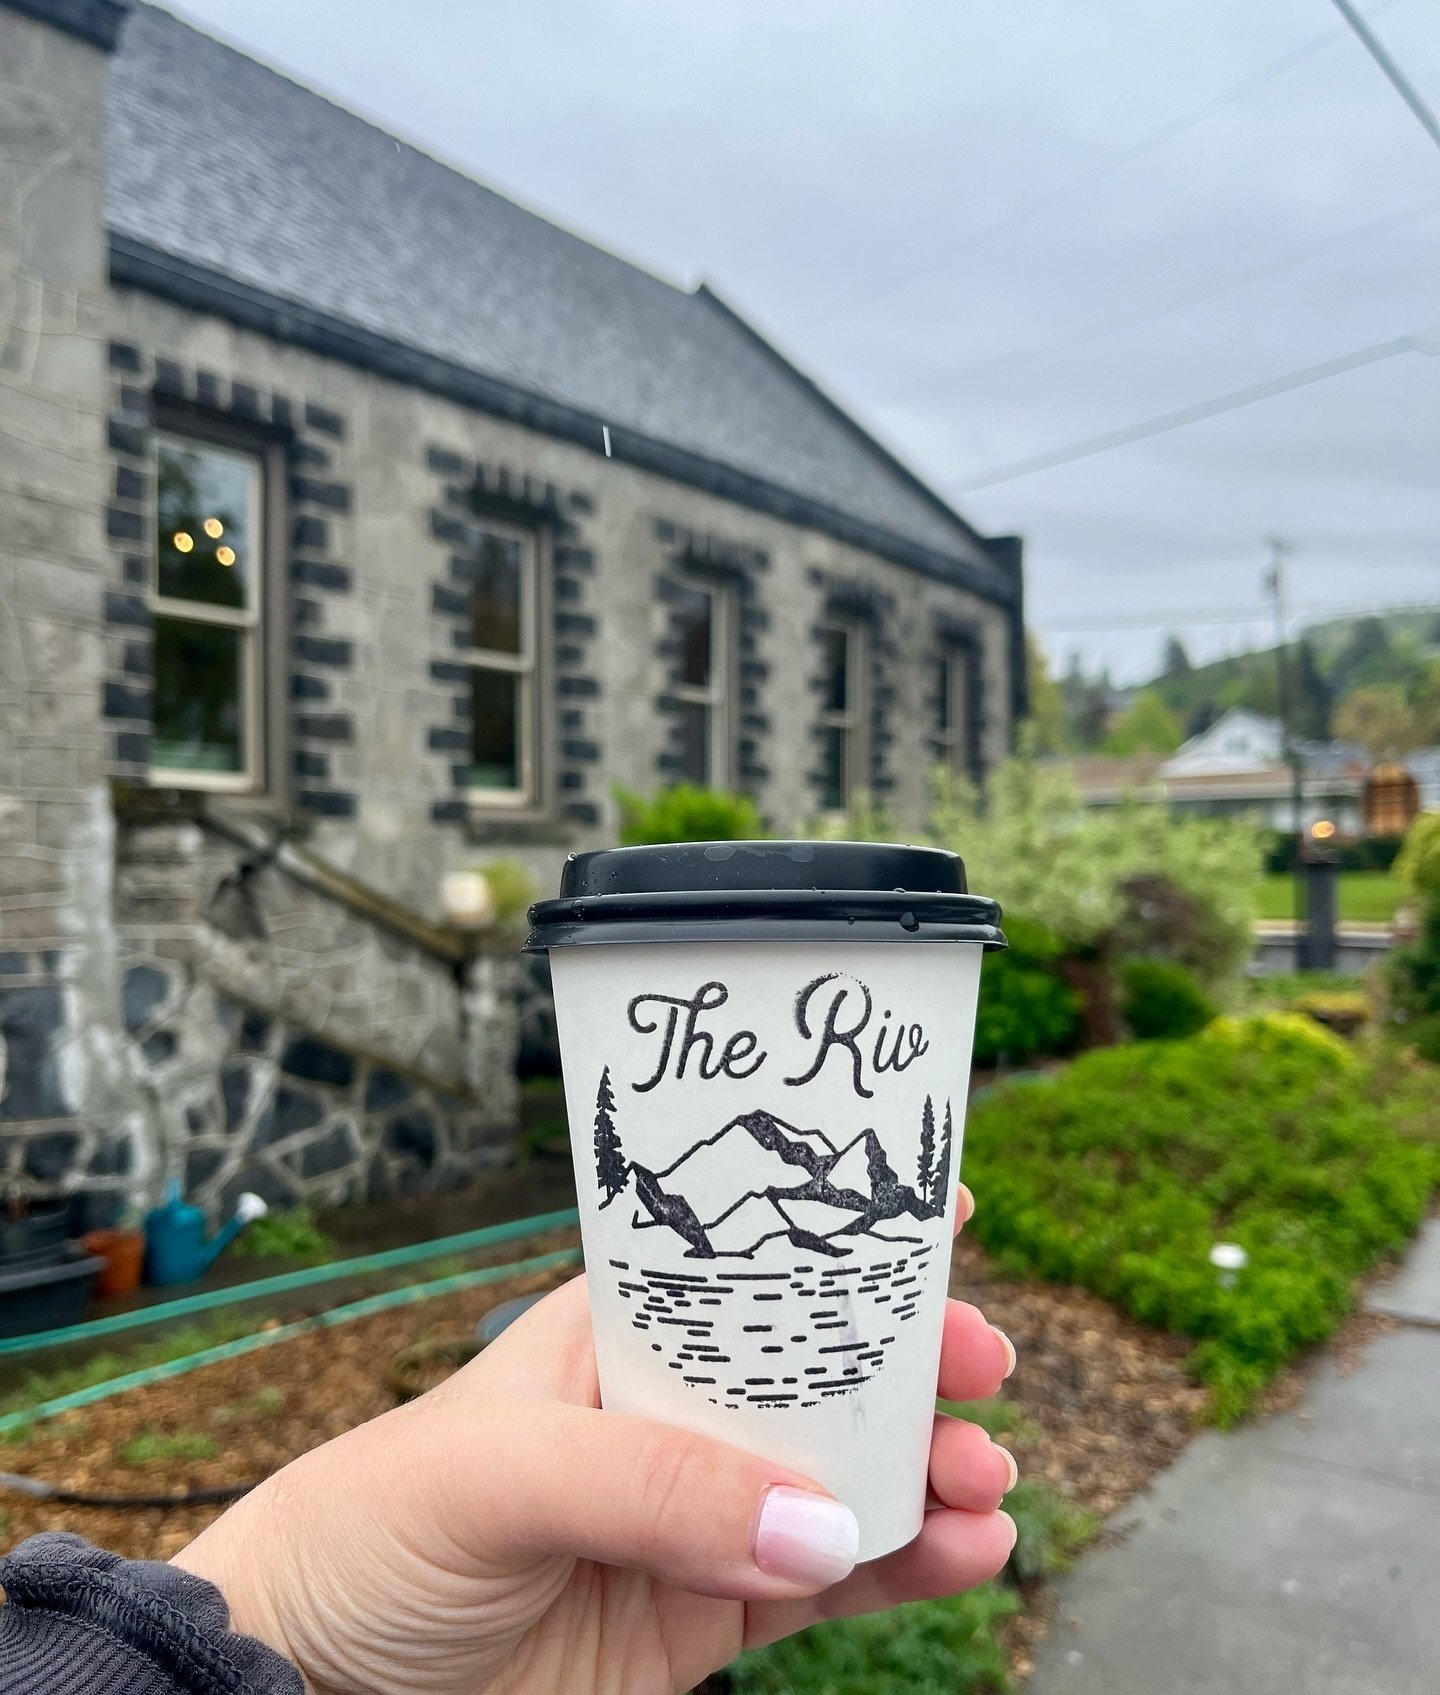 April showers bring May flowers&hellip; And yummy coffee 😋🌞

Don&rsquo;t let the rain get you down! Come join us for coffee and breakfast today. 

#coffee #theriv #cafe #specialtycoffee #specialtyroaster #yelptop100 #pnw #oregon #foodie #breakfast 